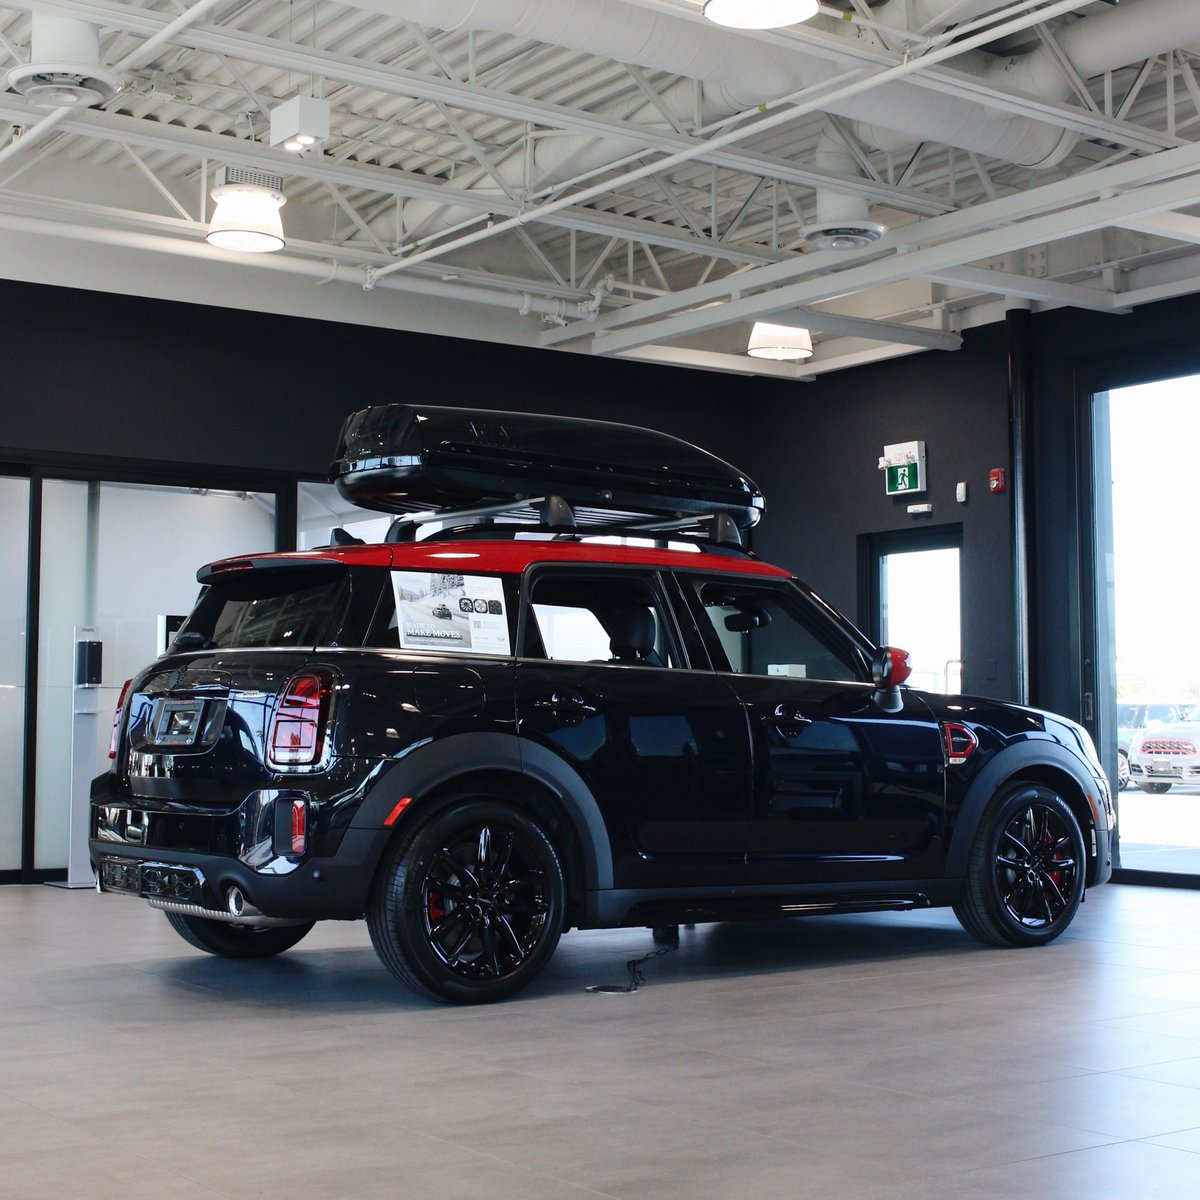 👇🏽Top 3 MINI Accessories for this winter👇🏽⁠ ⁠ ❄️ Roof Box ❄️ Ski & Snowboard Holder ❄️ Roof Rack Base Support System ⁠ Visit minirichmond.ca to learn more and to schedule an appointment for installation today. ⁠ ⁠ #MINIRichmond #WinterAdventures #MINIAccessories